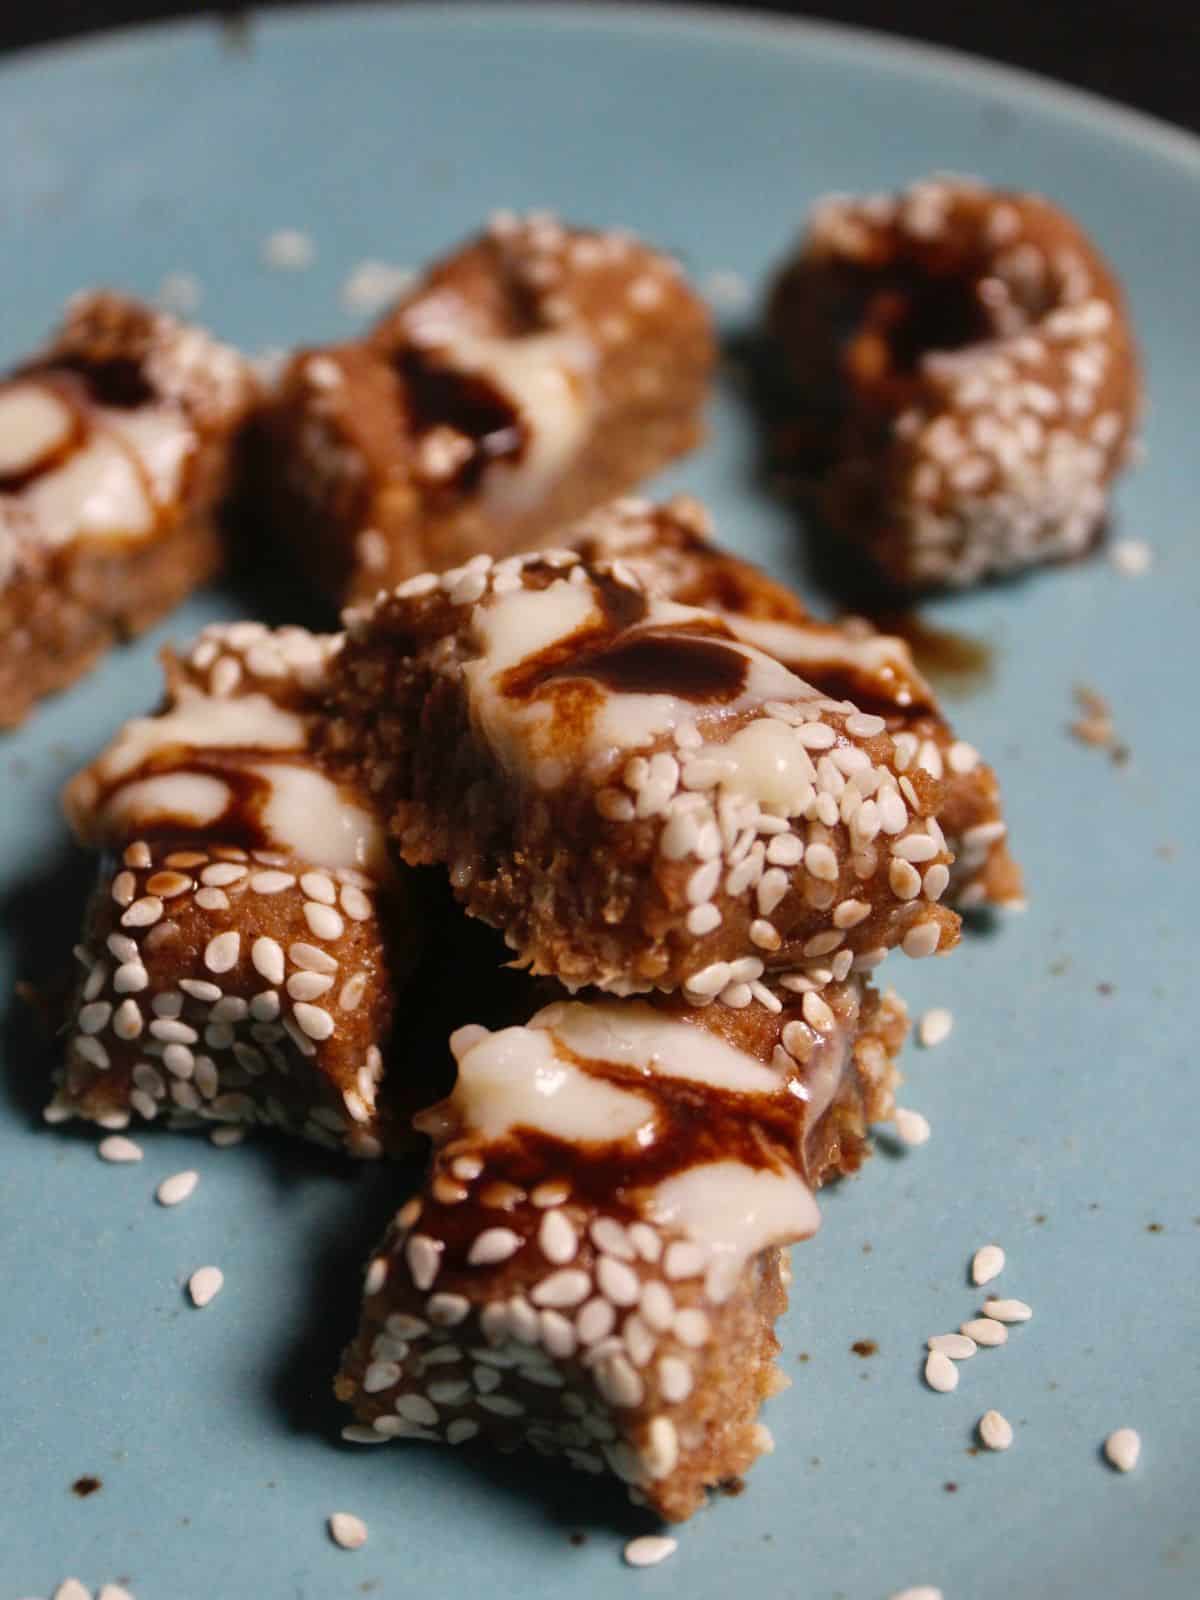 Yummy Peanut Bites With Chocolate Filling